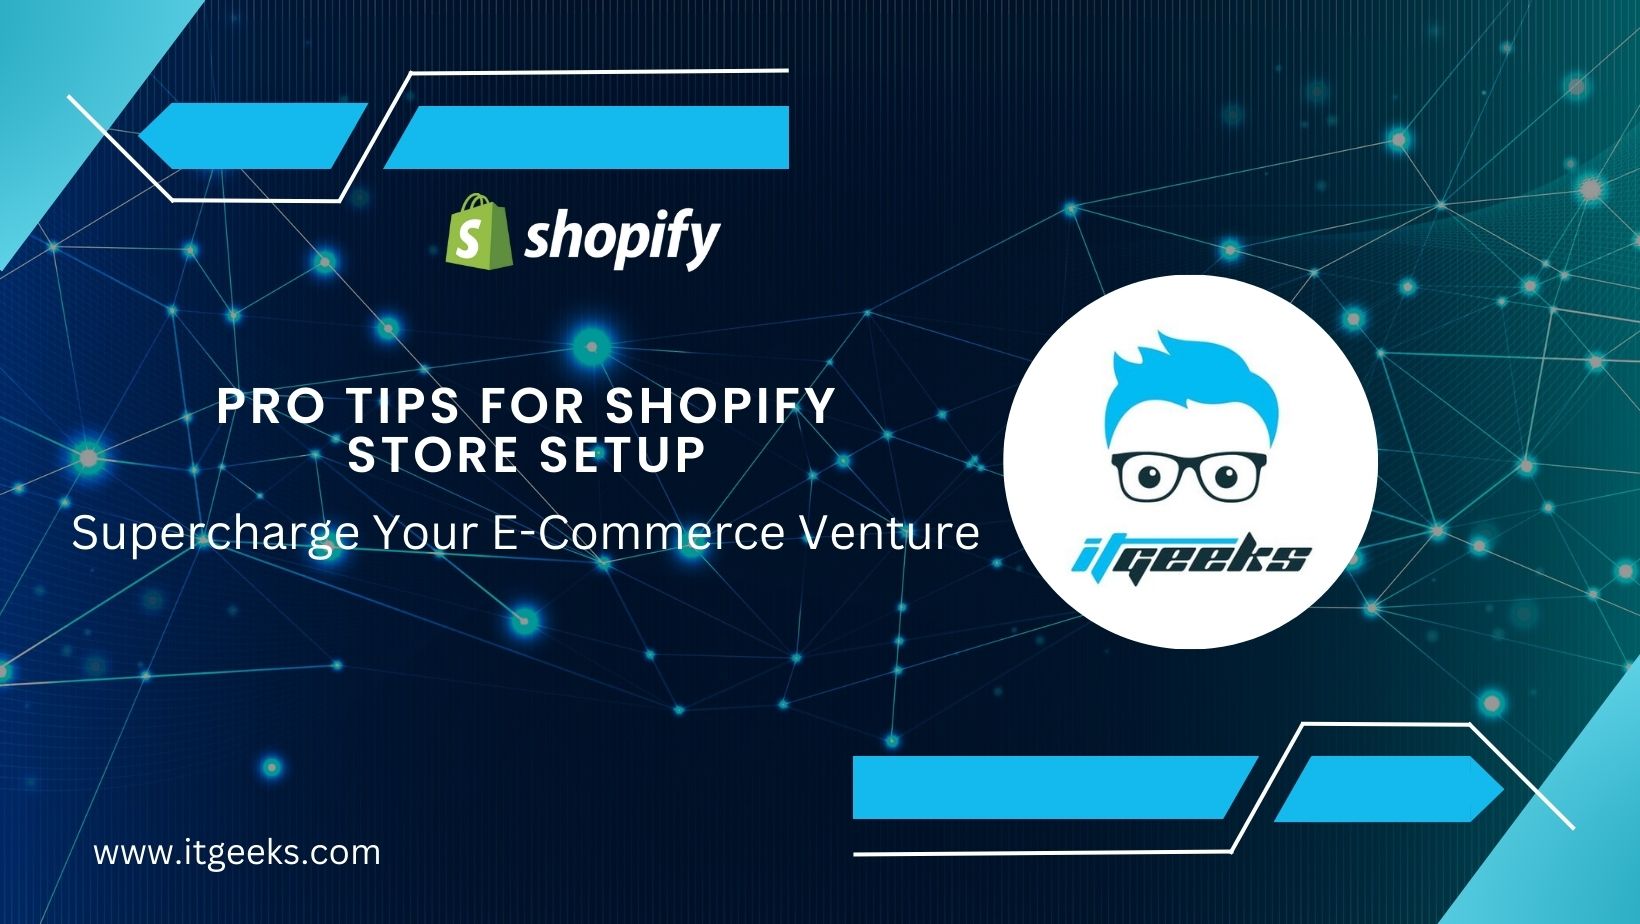 Pro Tips for Shopify Store Setup: Supercharge Your E-Commerce Venture